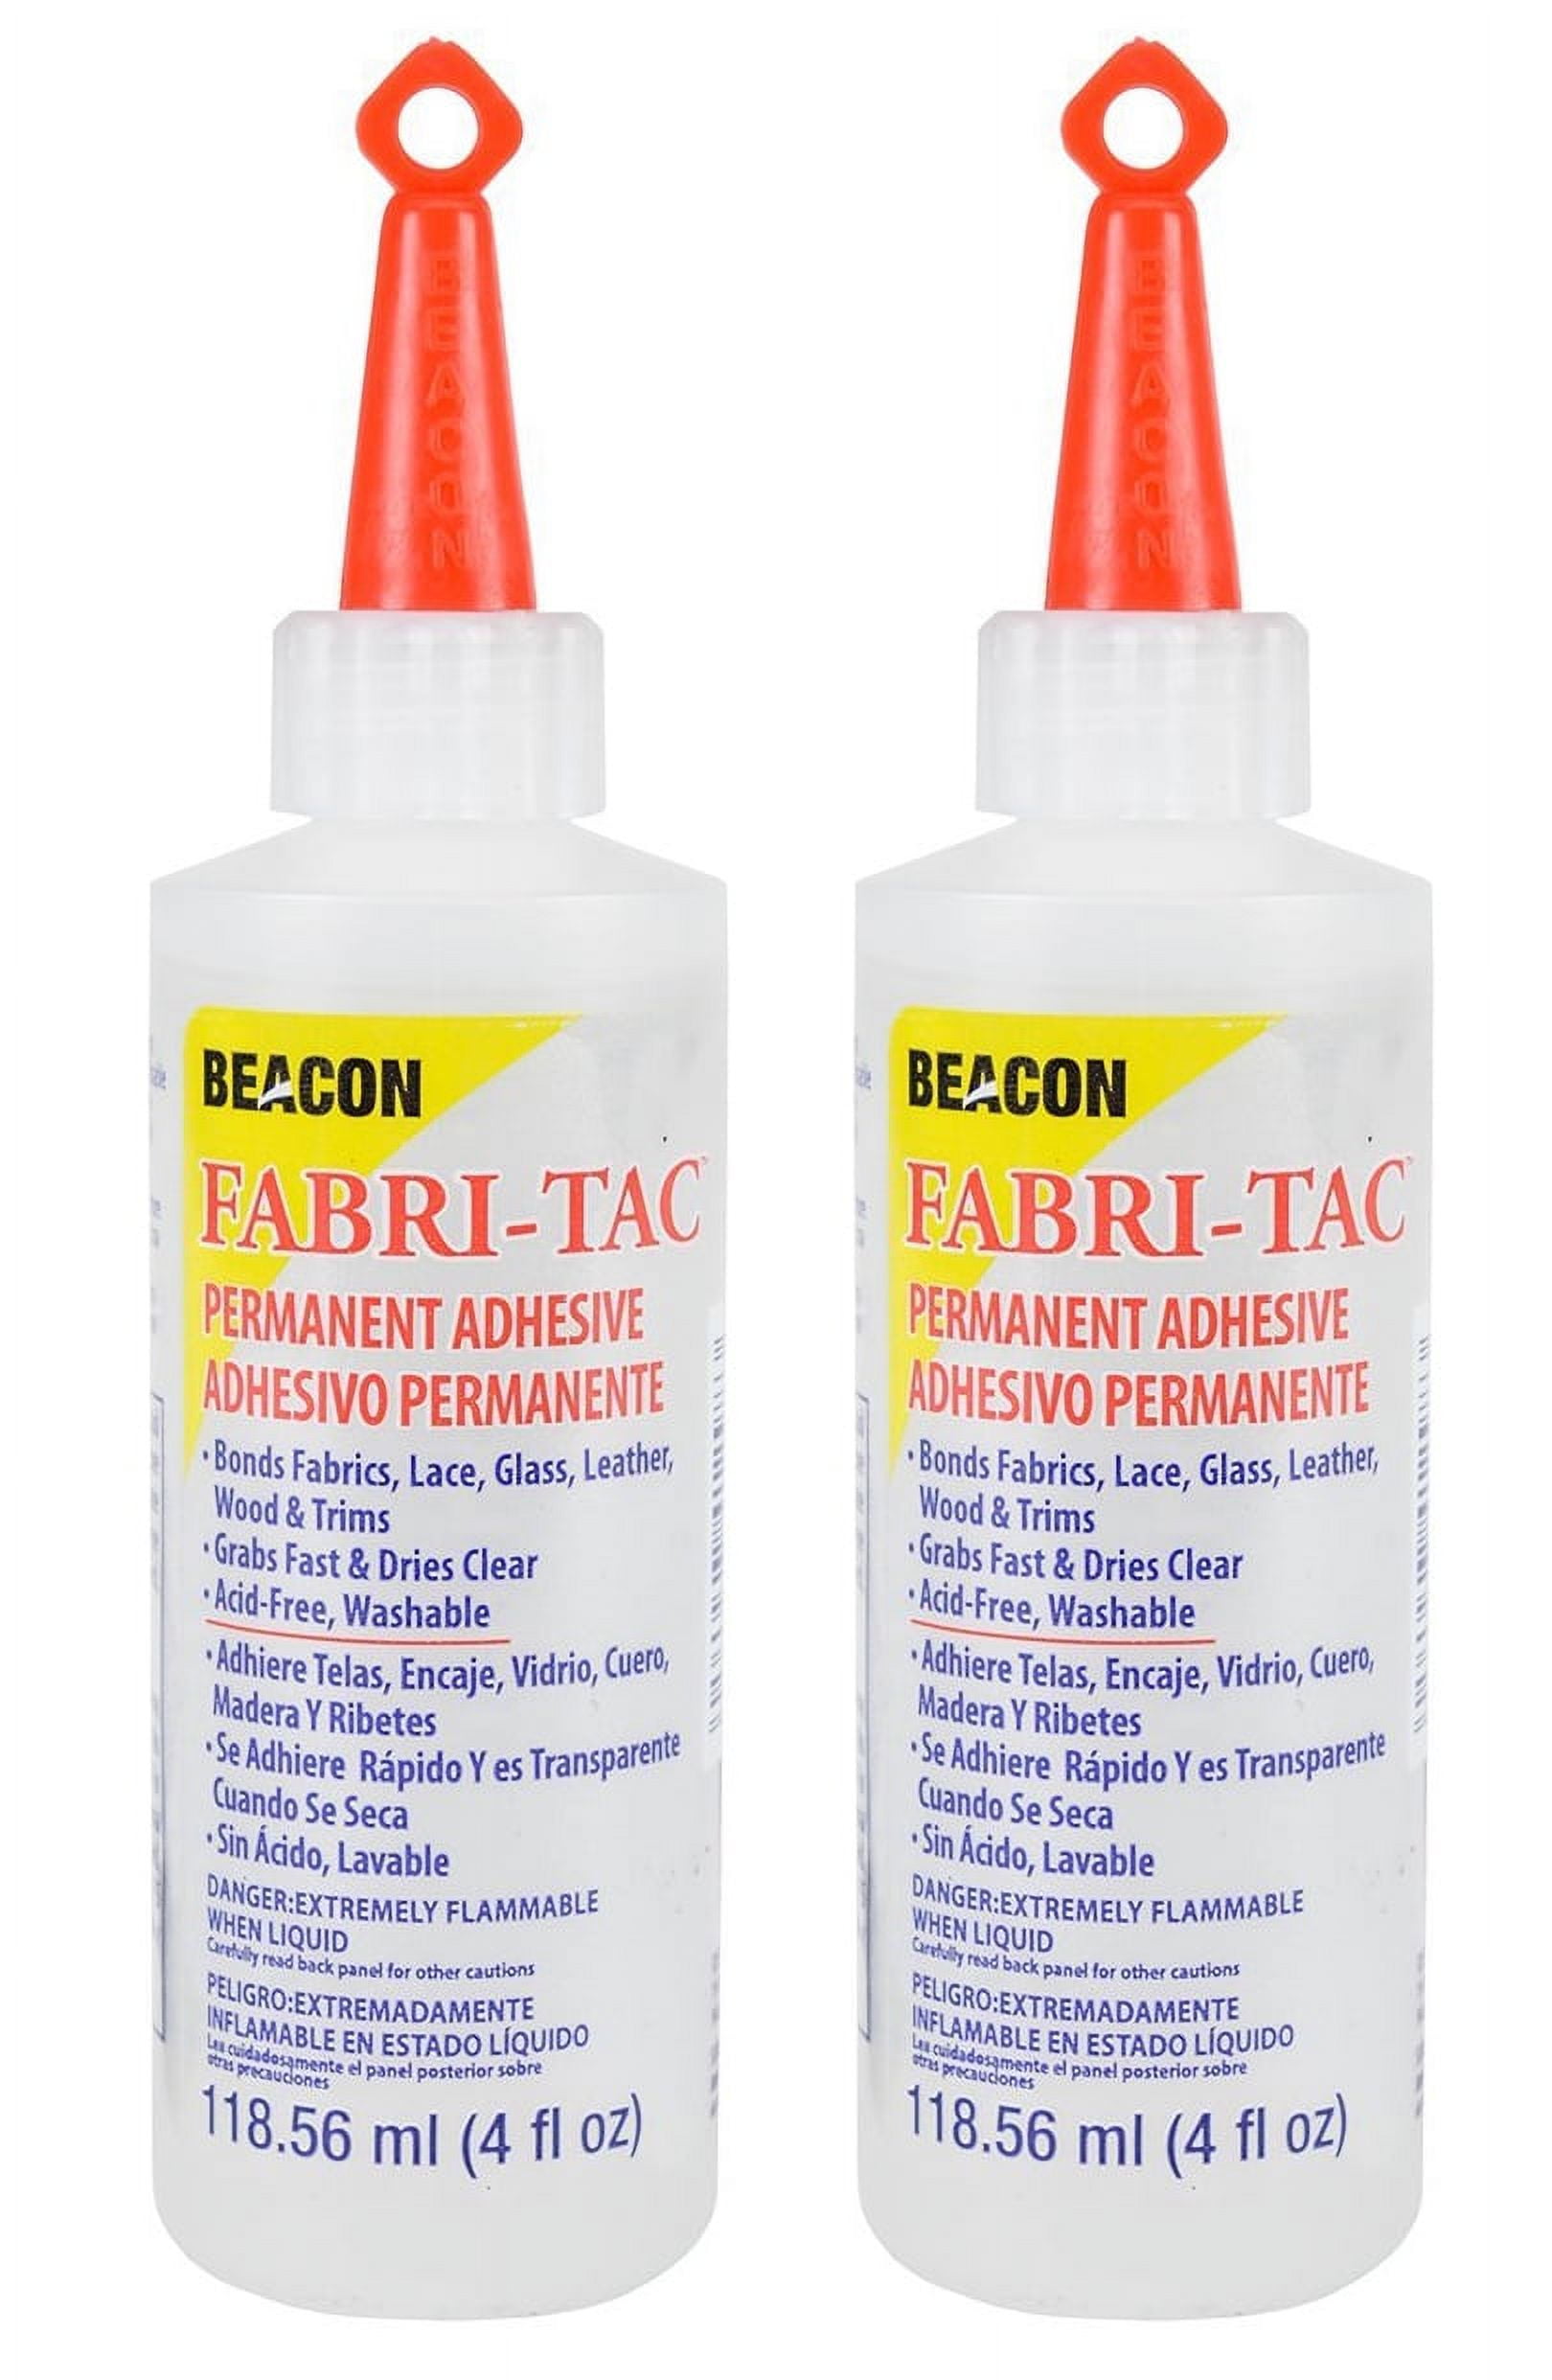 Twelve-pack of Beacon Fabri-Tac Permanent Adhesive, 4 Ounce (Box of 12)